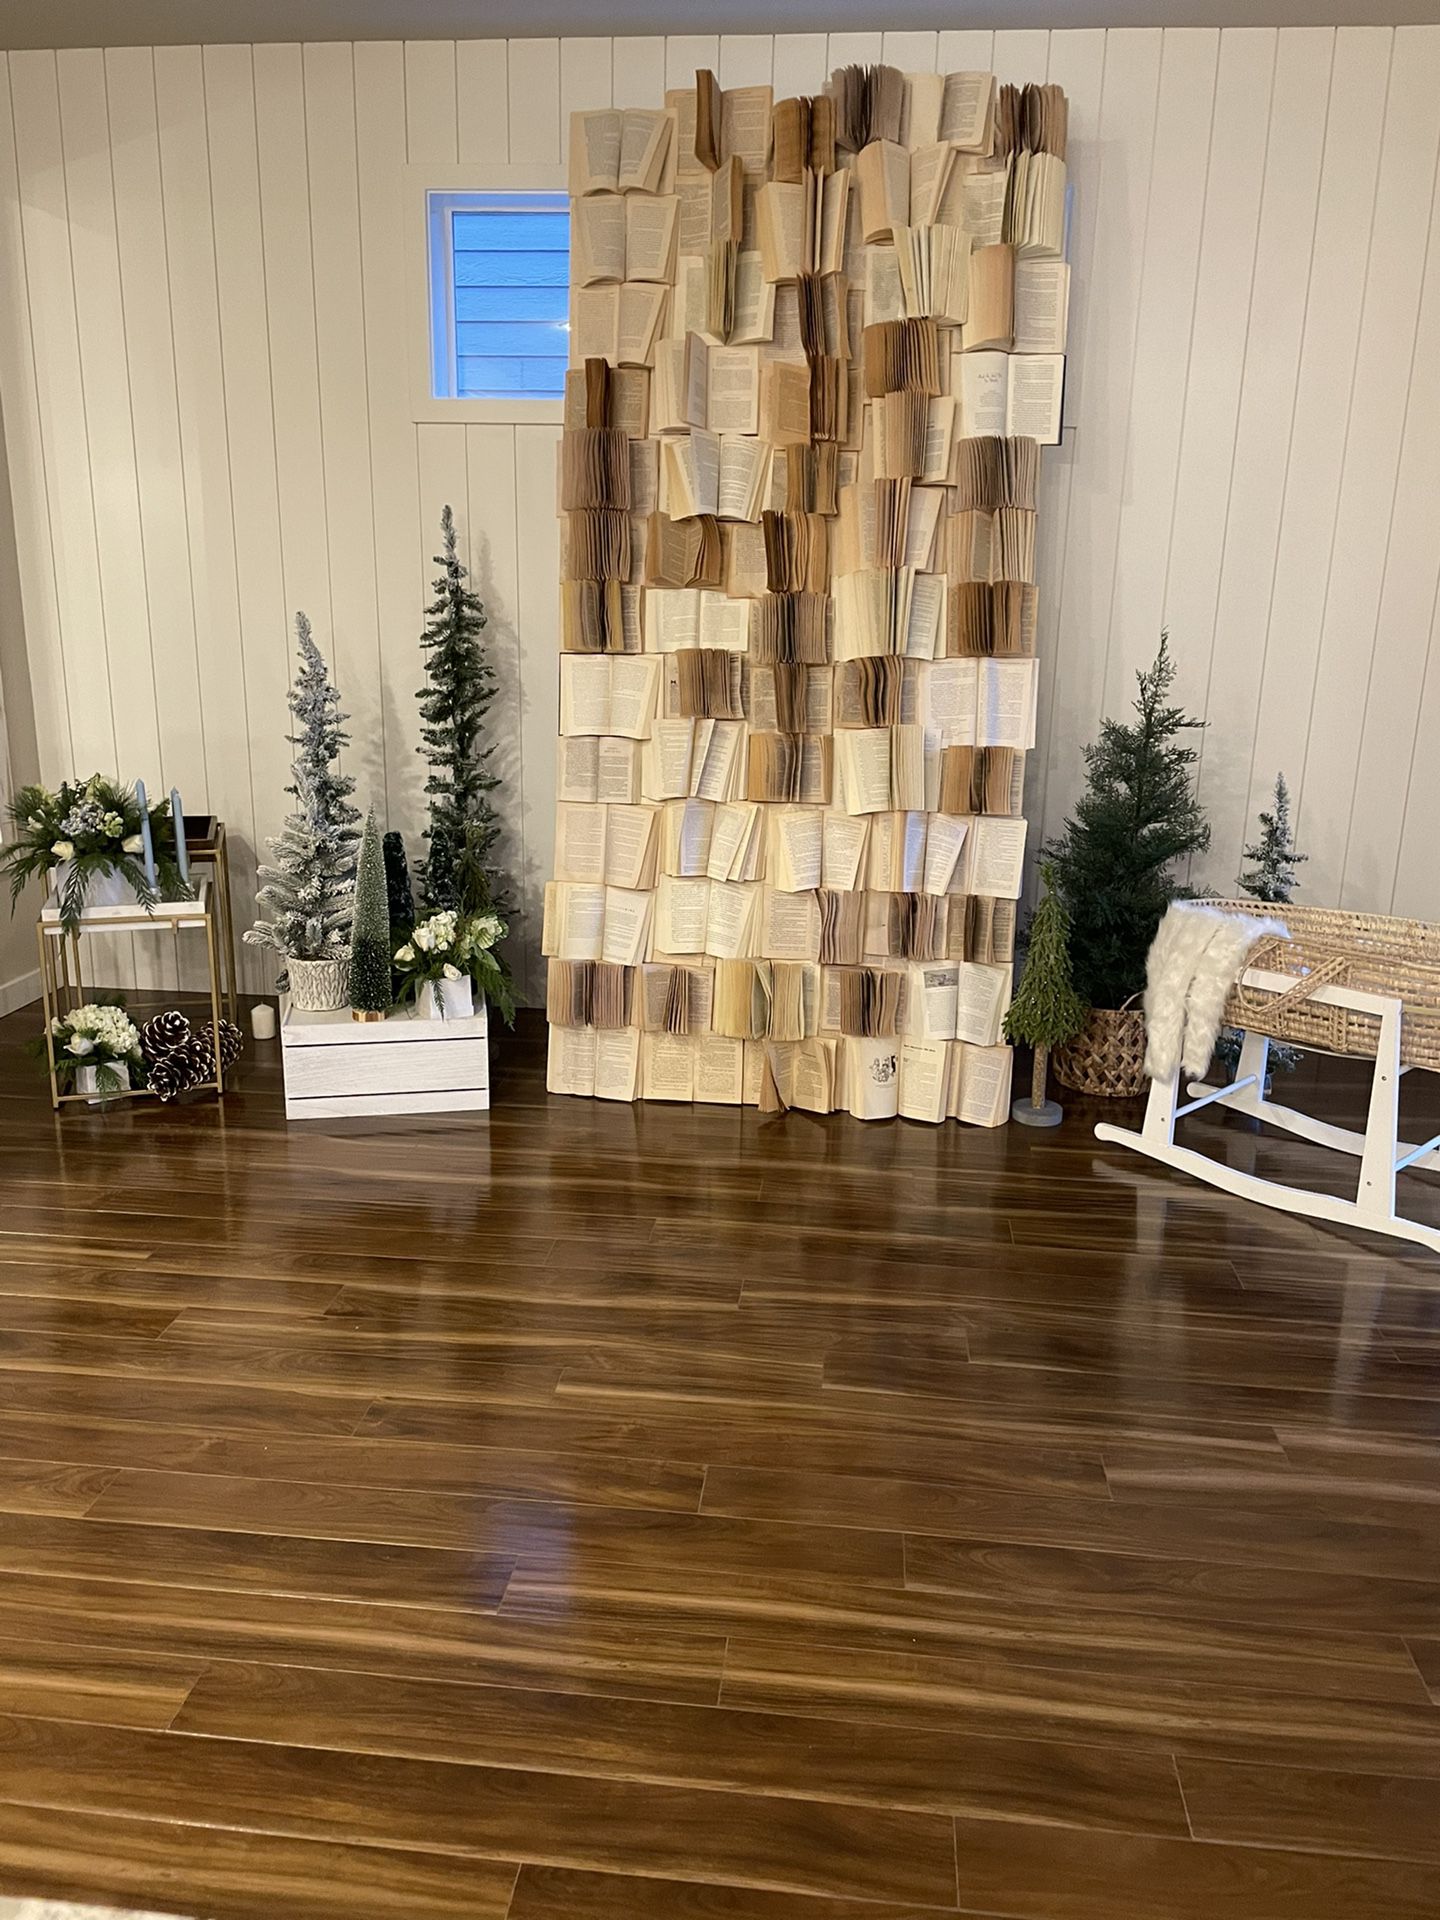 9 Ft Book Wall (Babyshower,party,event decoration) 